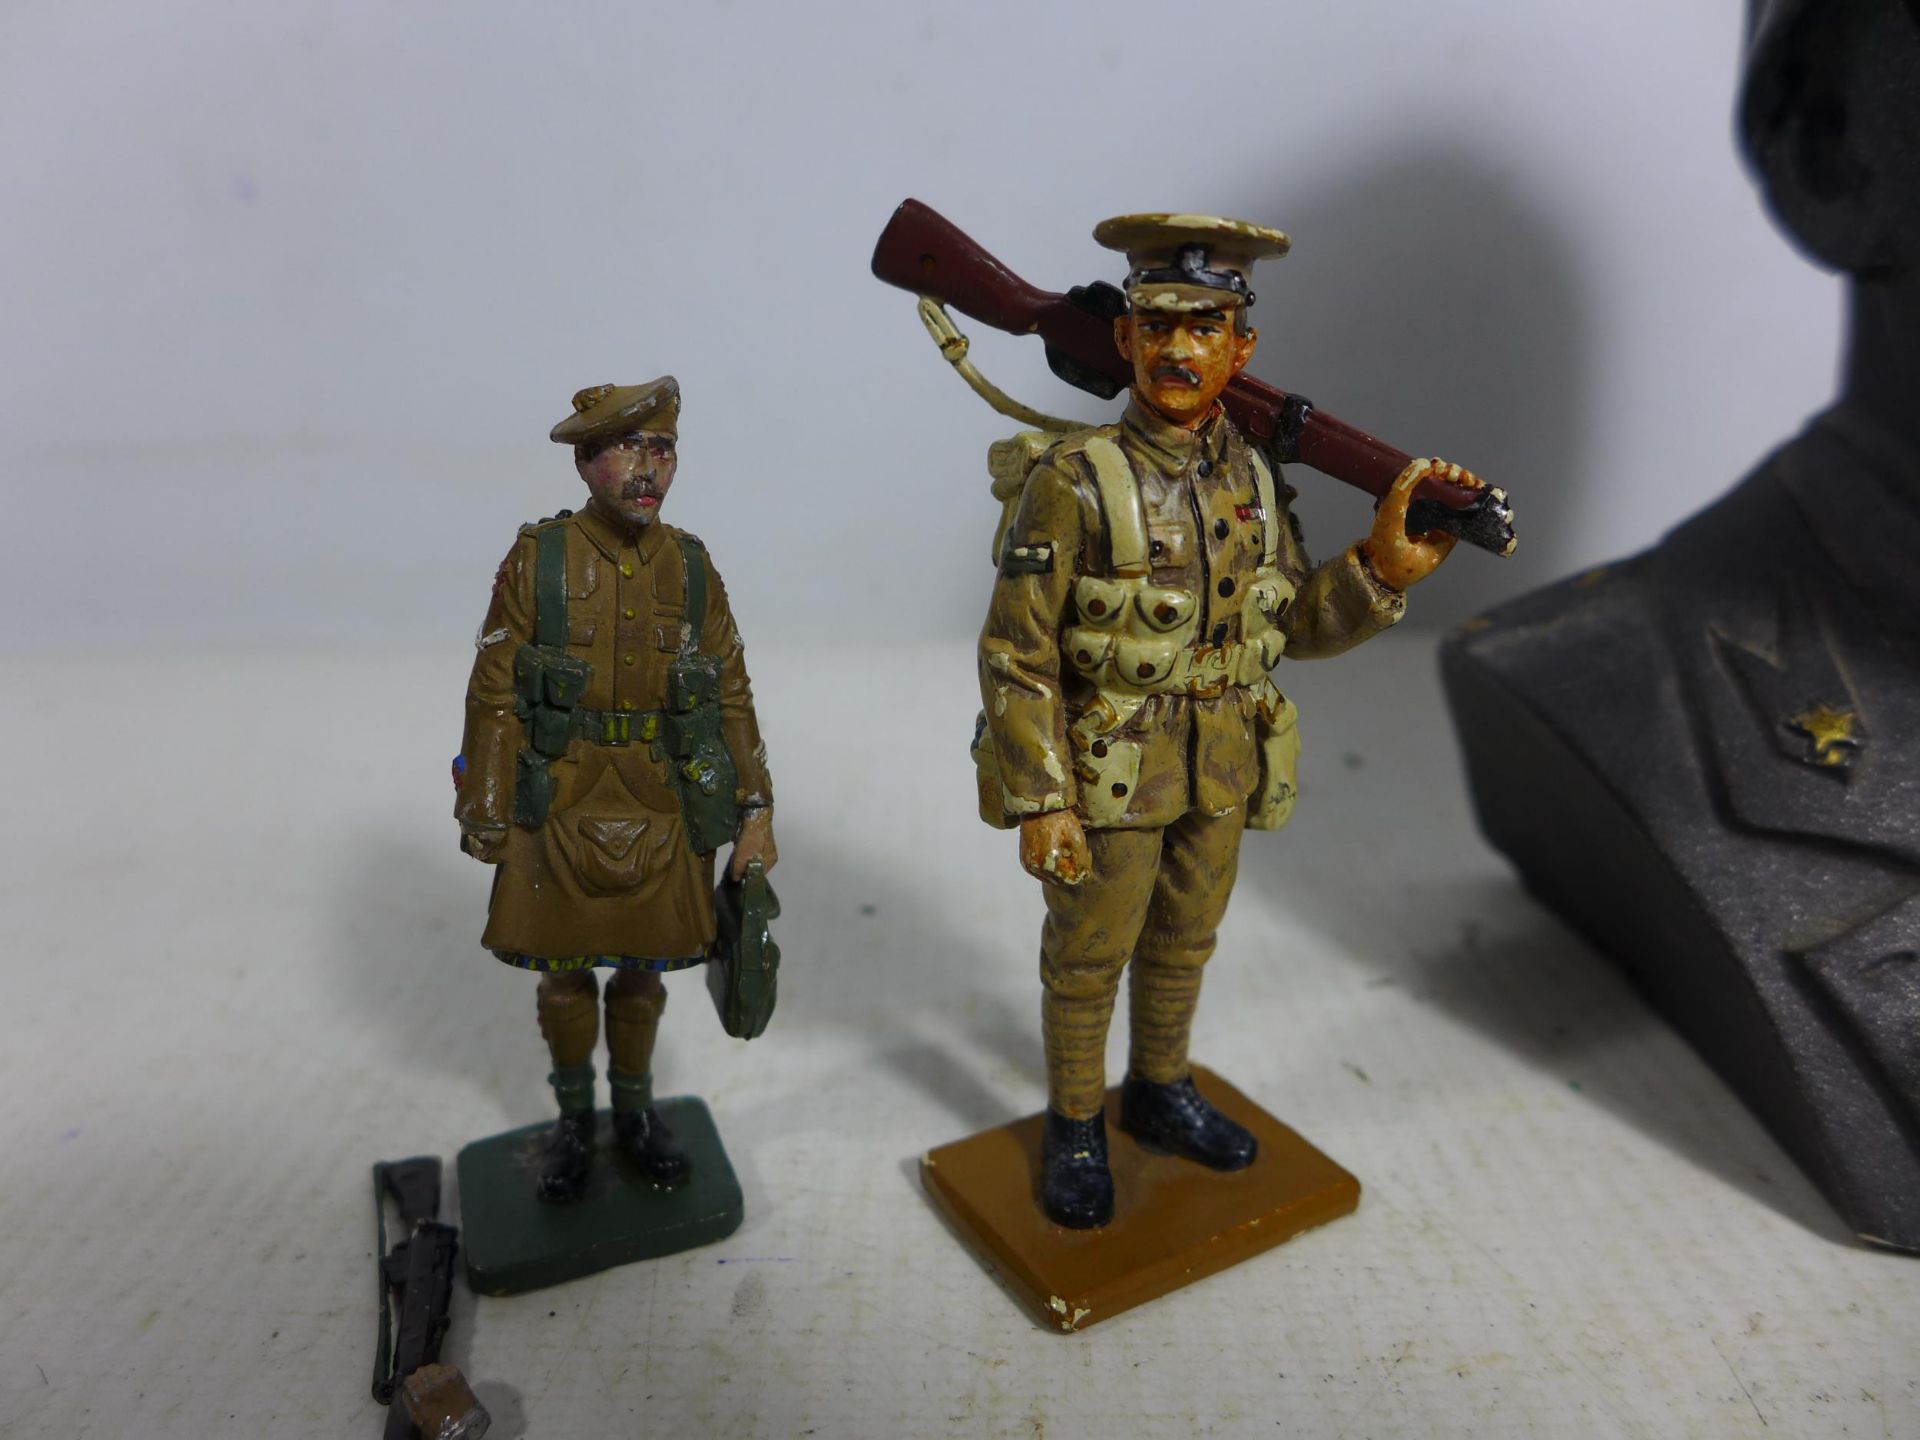 FOUR INERT CANNON SHELLS, TWO MODEL SOLDIERS AND A BUST OF AN ITALIAN SOLDIER - Image 3 of 5